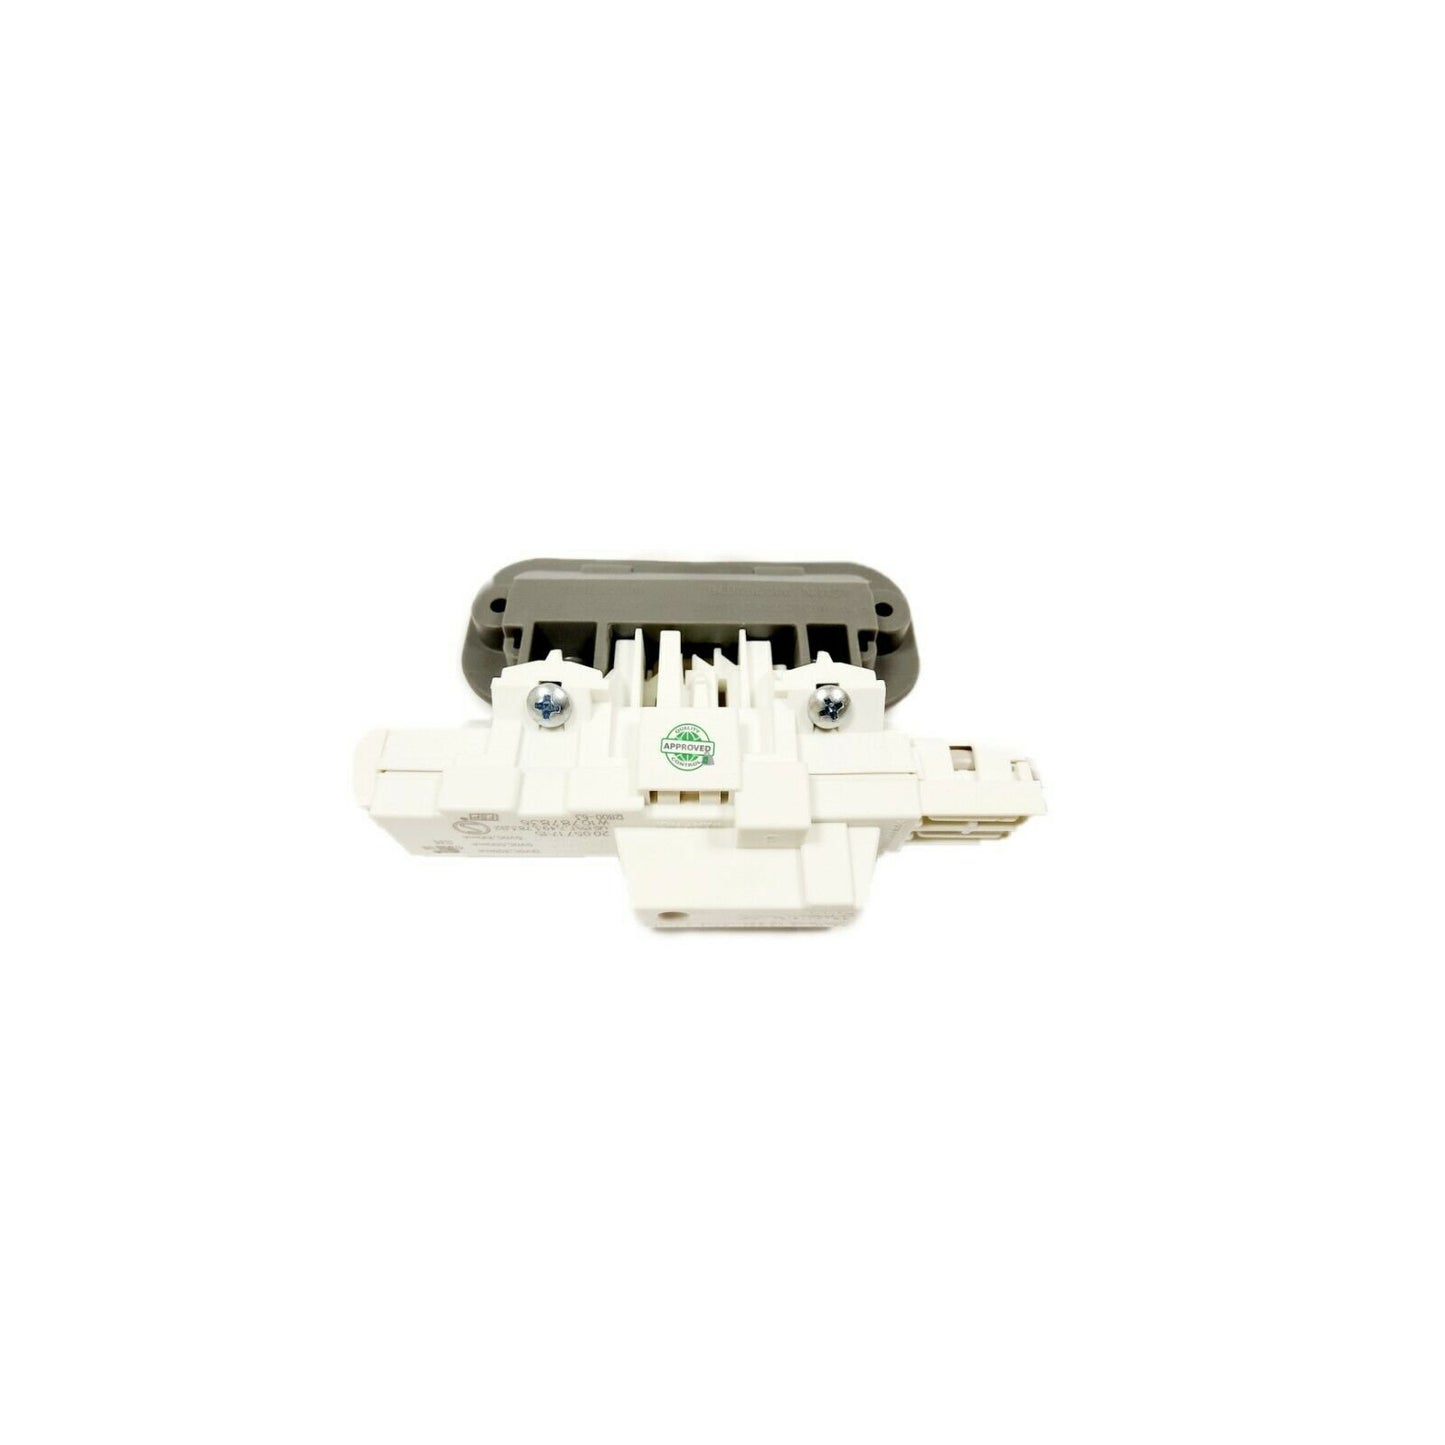 ReplacementParts- EAP11722981-PD00028176 Washer Lid Lock Latch Assembly (White)